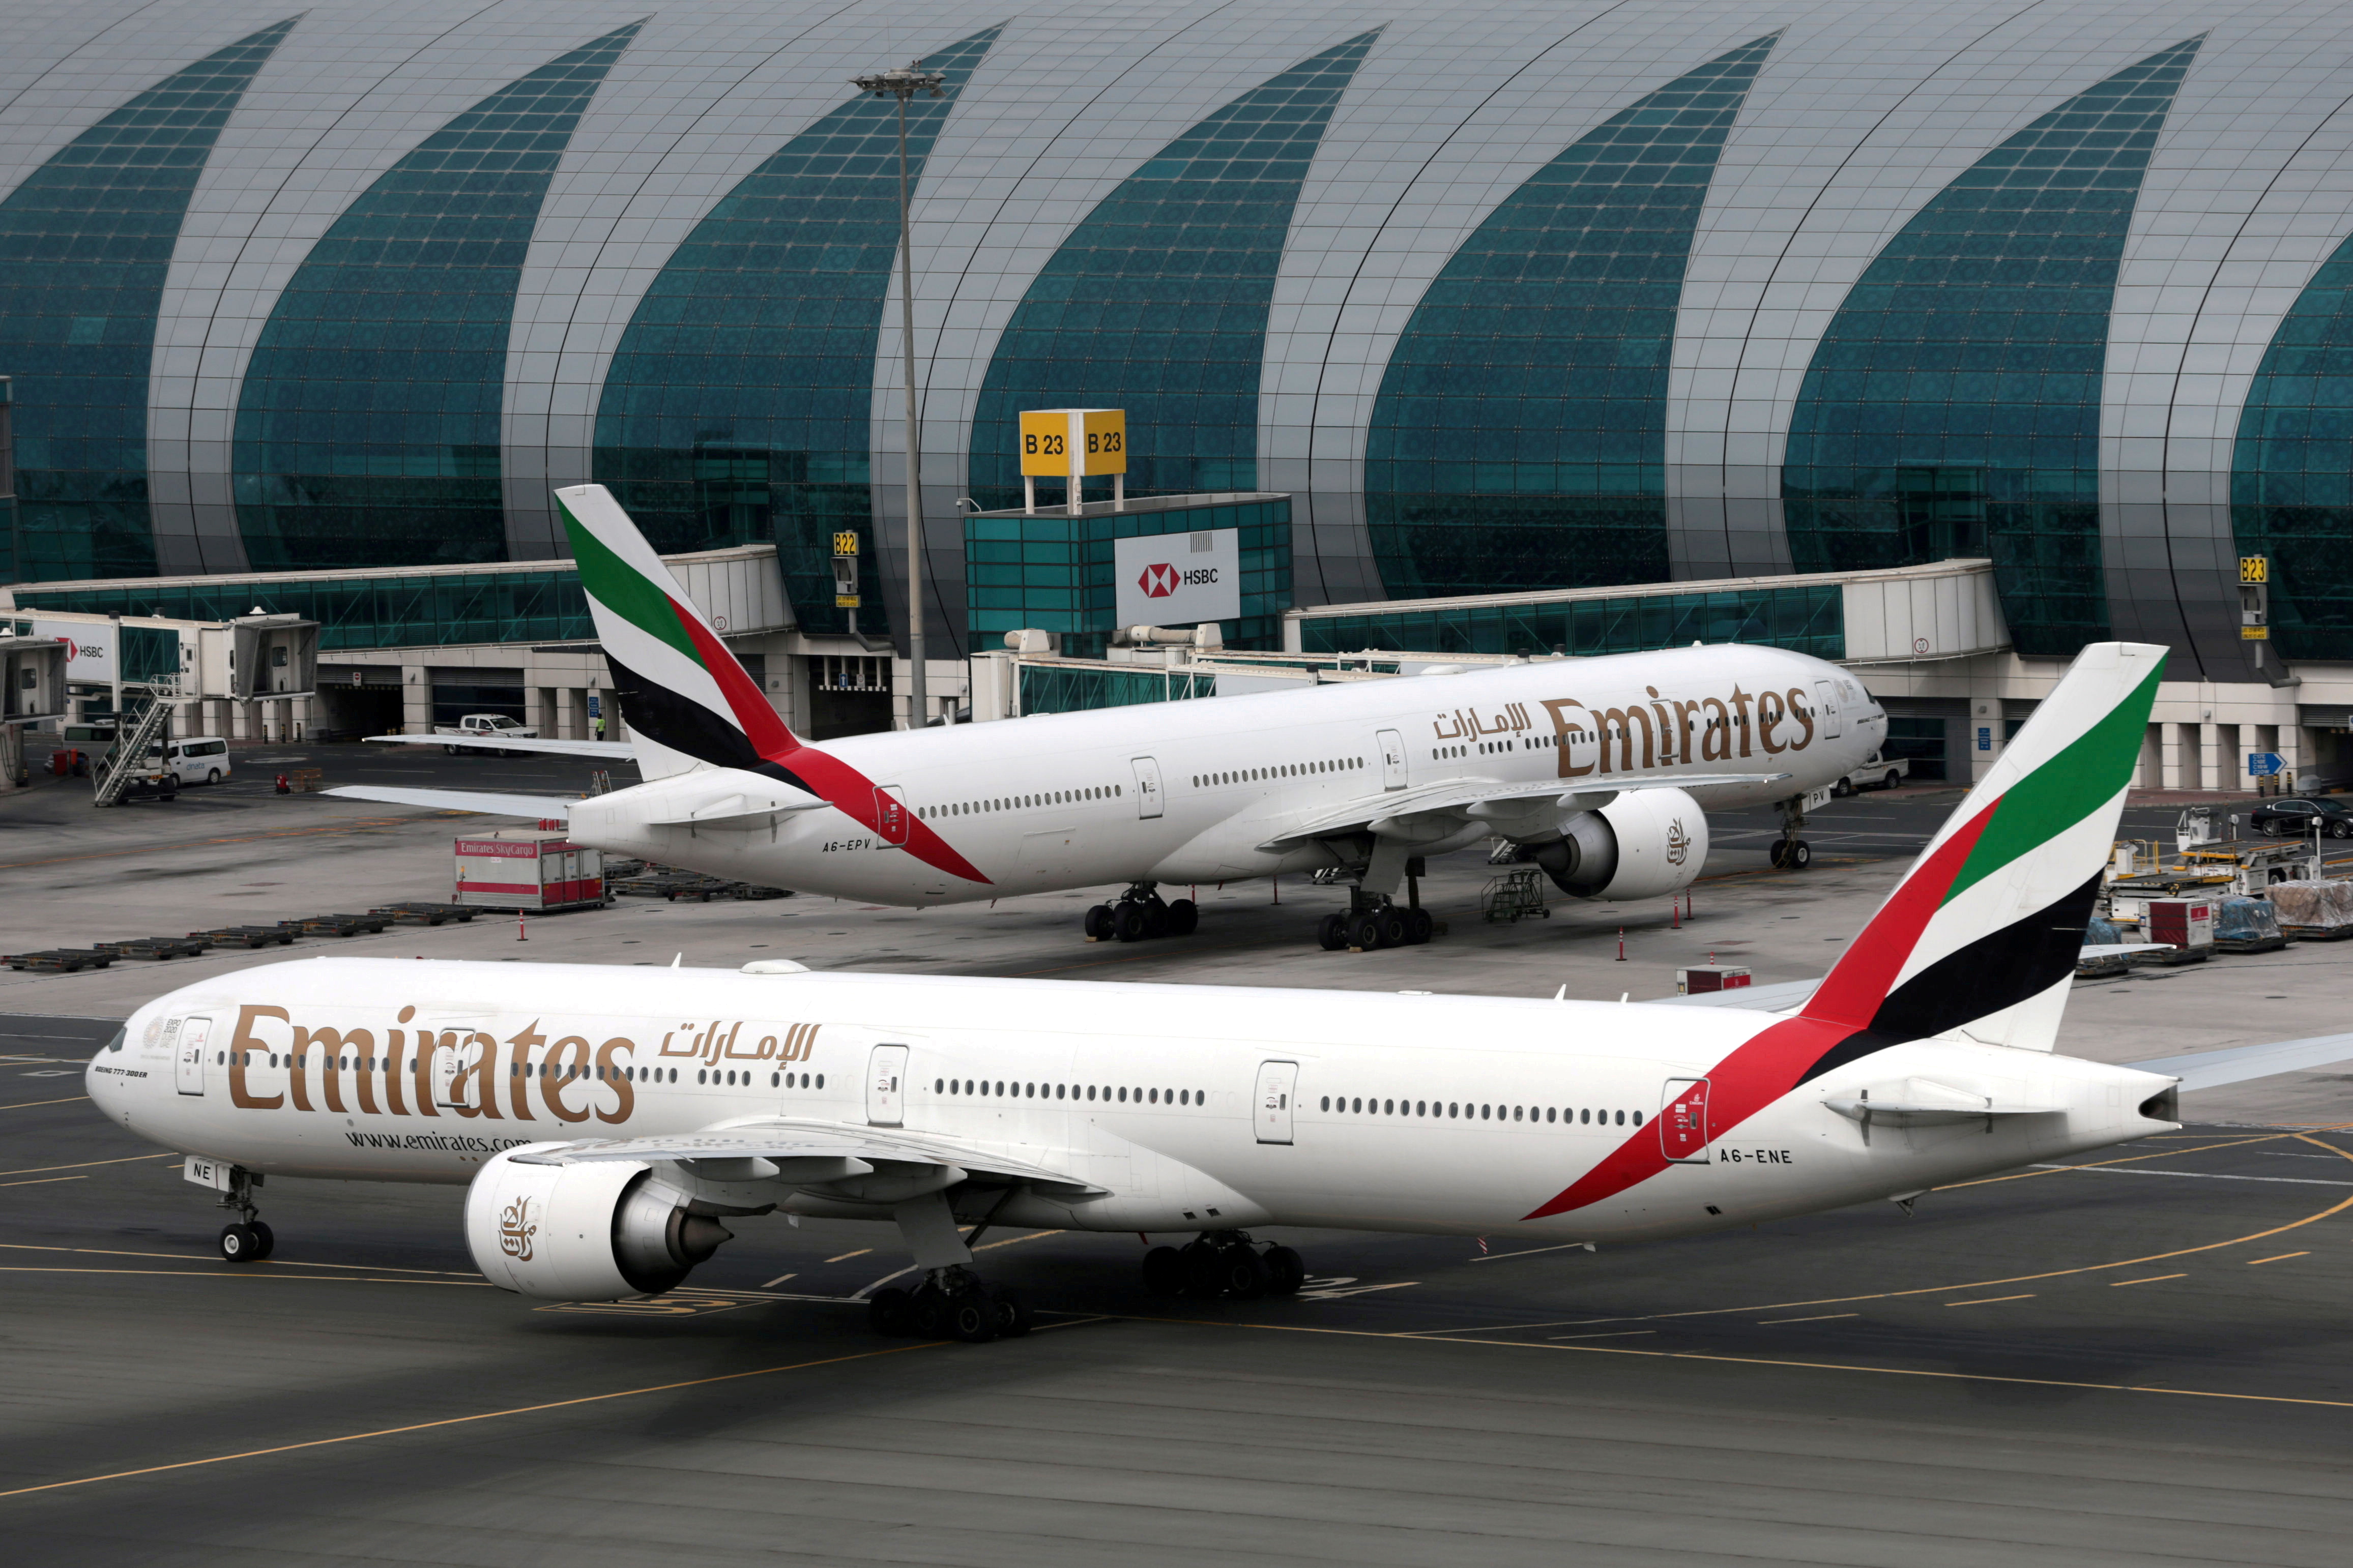 Emirates Airline Boeing 777-300ER planes are seen at Dubai International Airport in Dubai, United Arab Emirates, February 15, 2019. REUTERS/Christopher Pike/File Photo